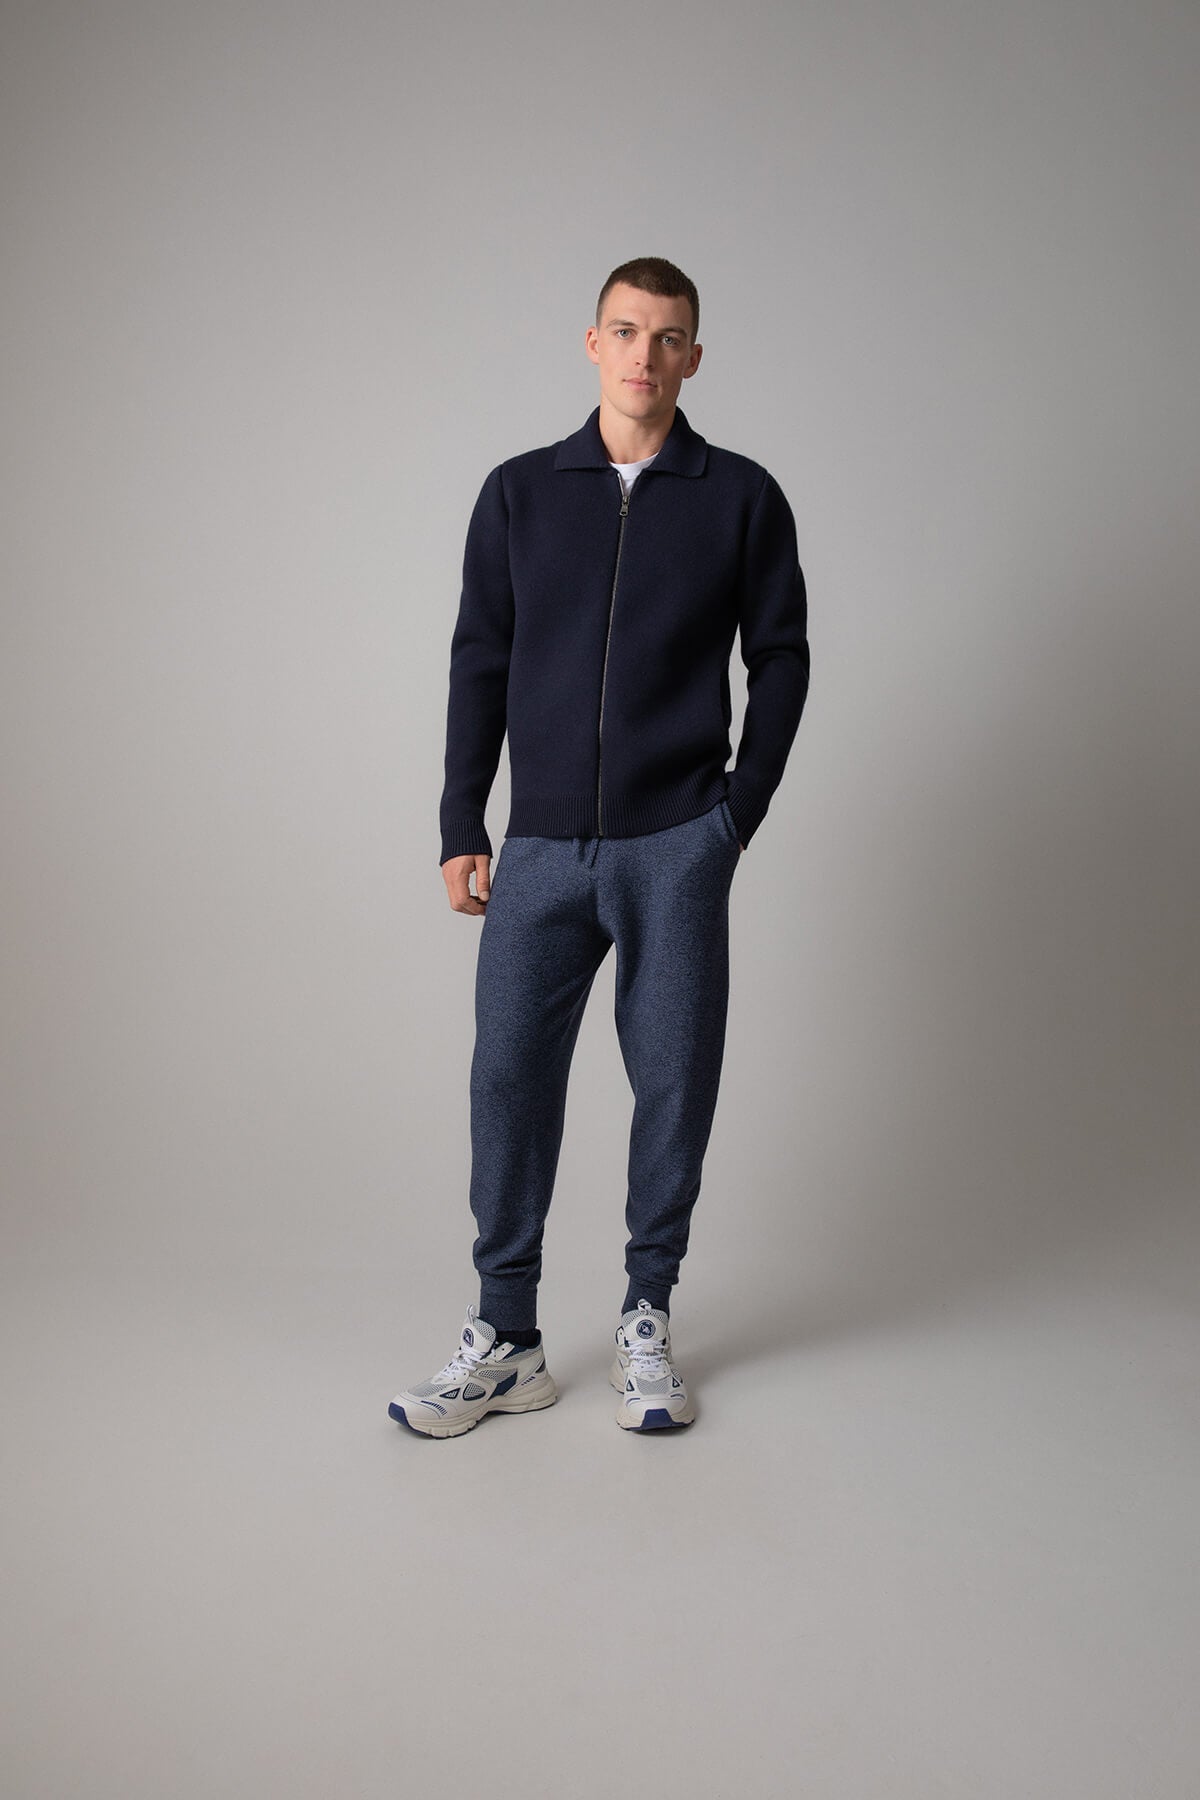 Johnstons of Elgin’s Men's Milano Stitch Cashmere Zip Jacket in Dark Navy on model wearing blue joggers on a grey background KAA05113SD7286